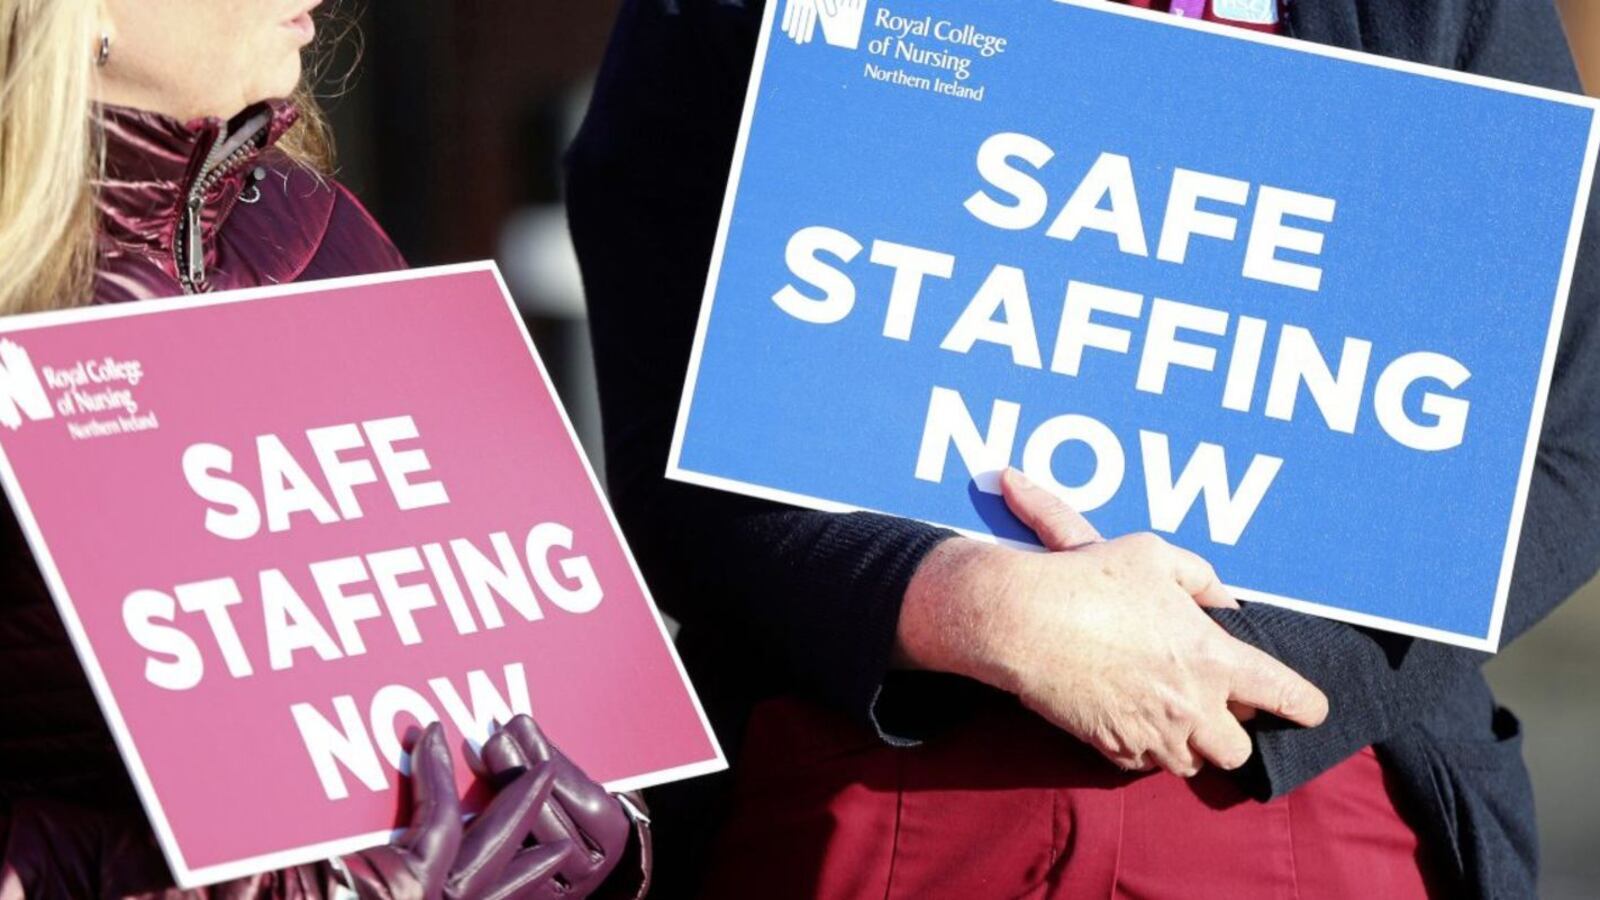 The Royal College of Nursing in Northern Ireland has said failing to increase student places will only create more workforce problems in the future.